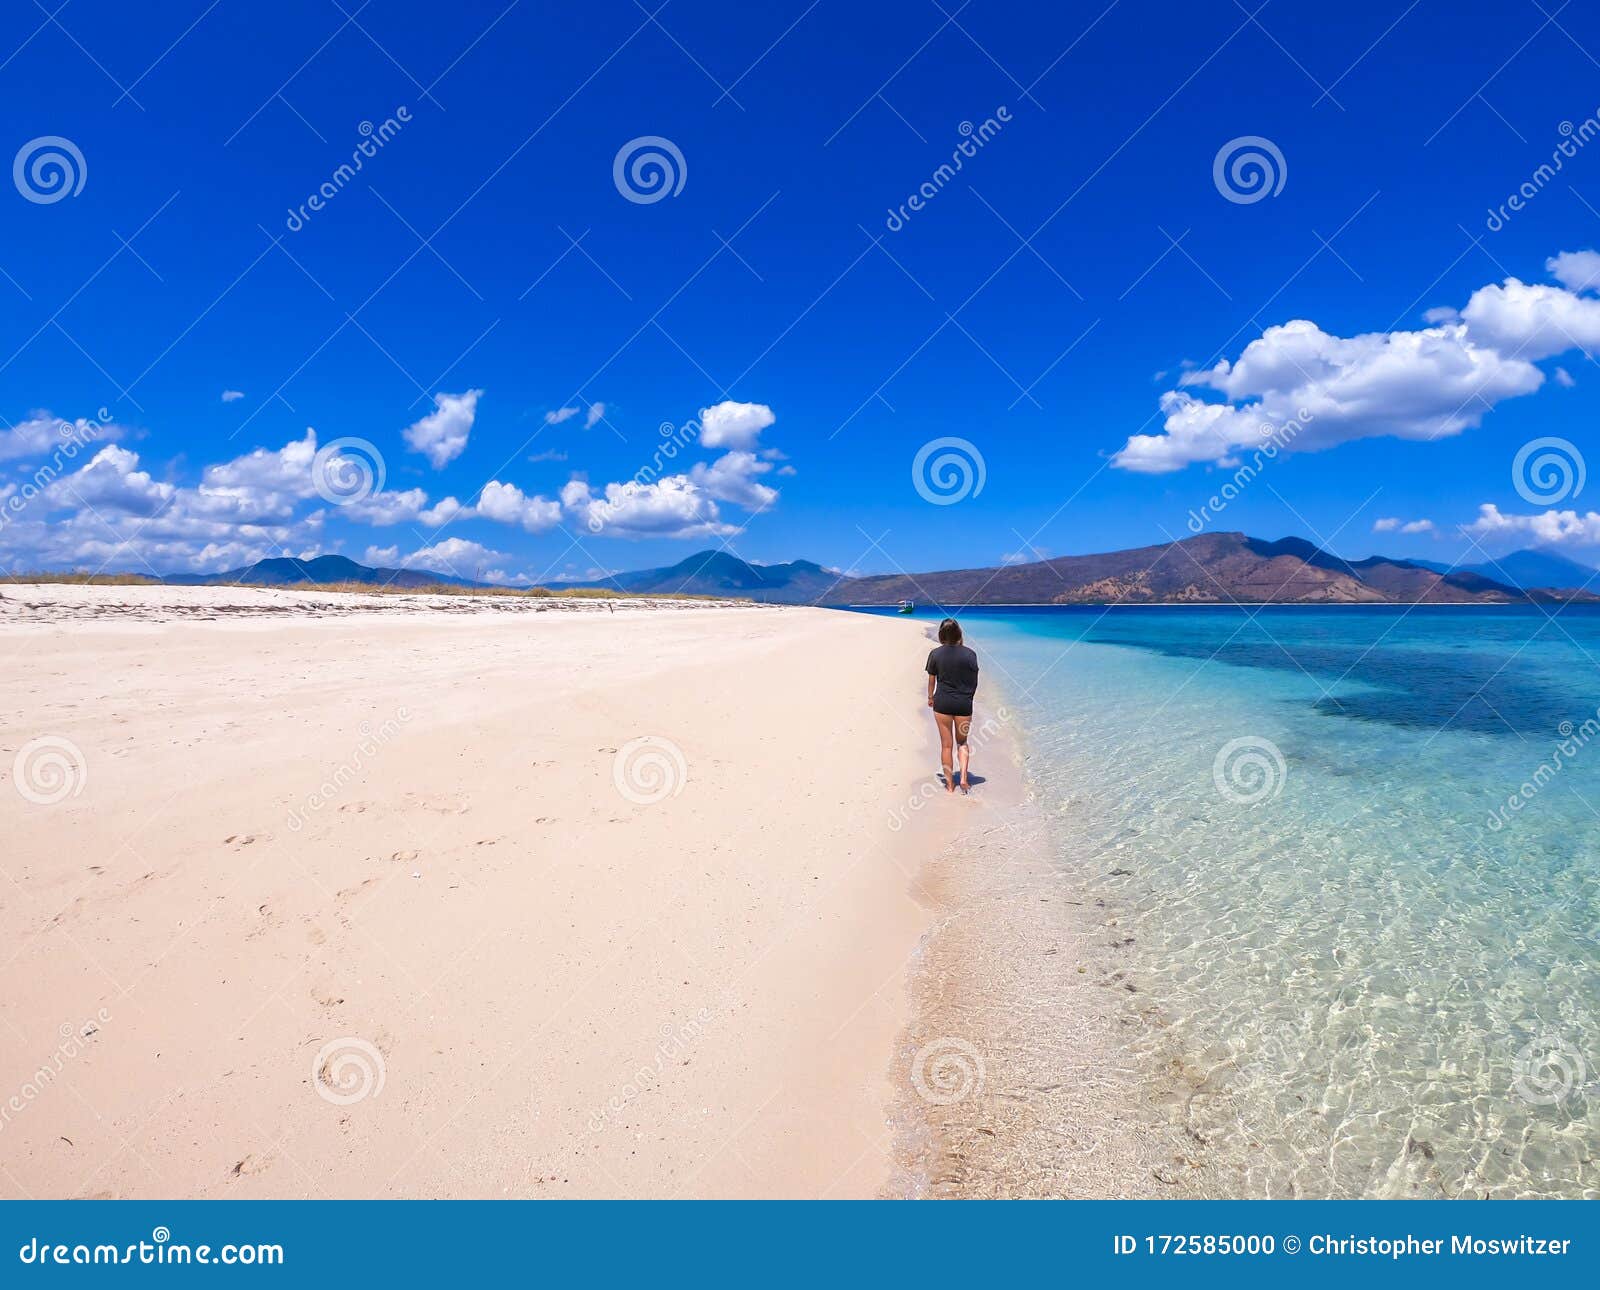 maumere - a girl in black t-shirt walking on the beach